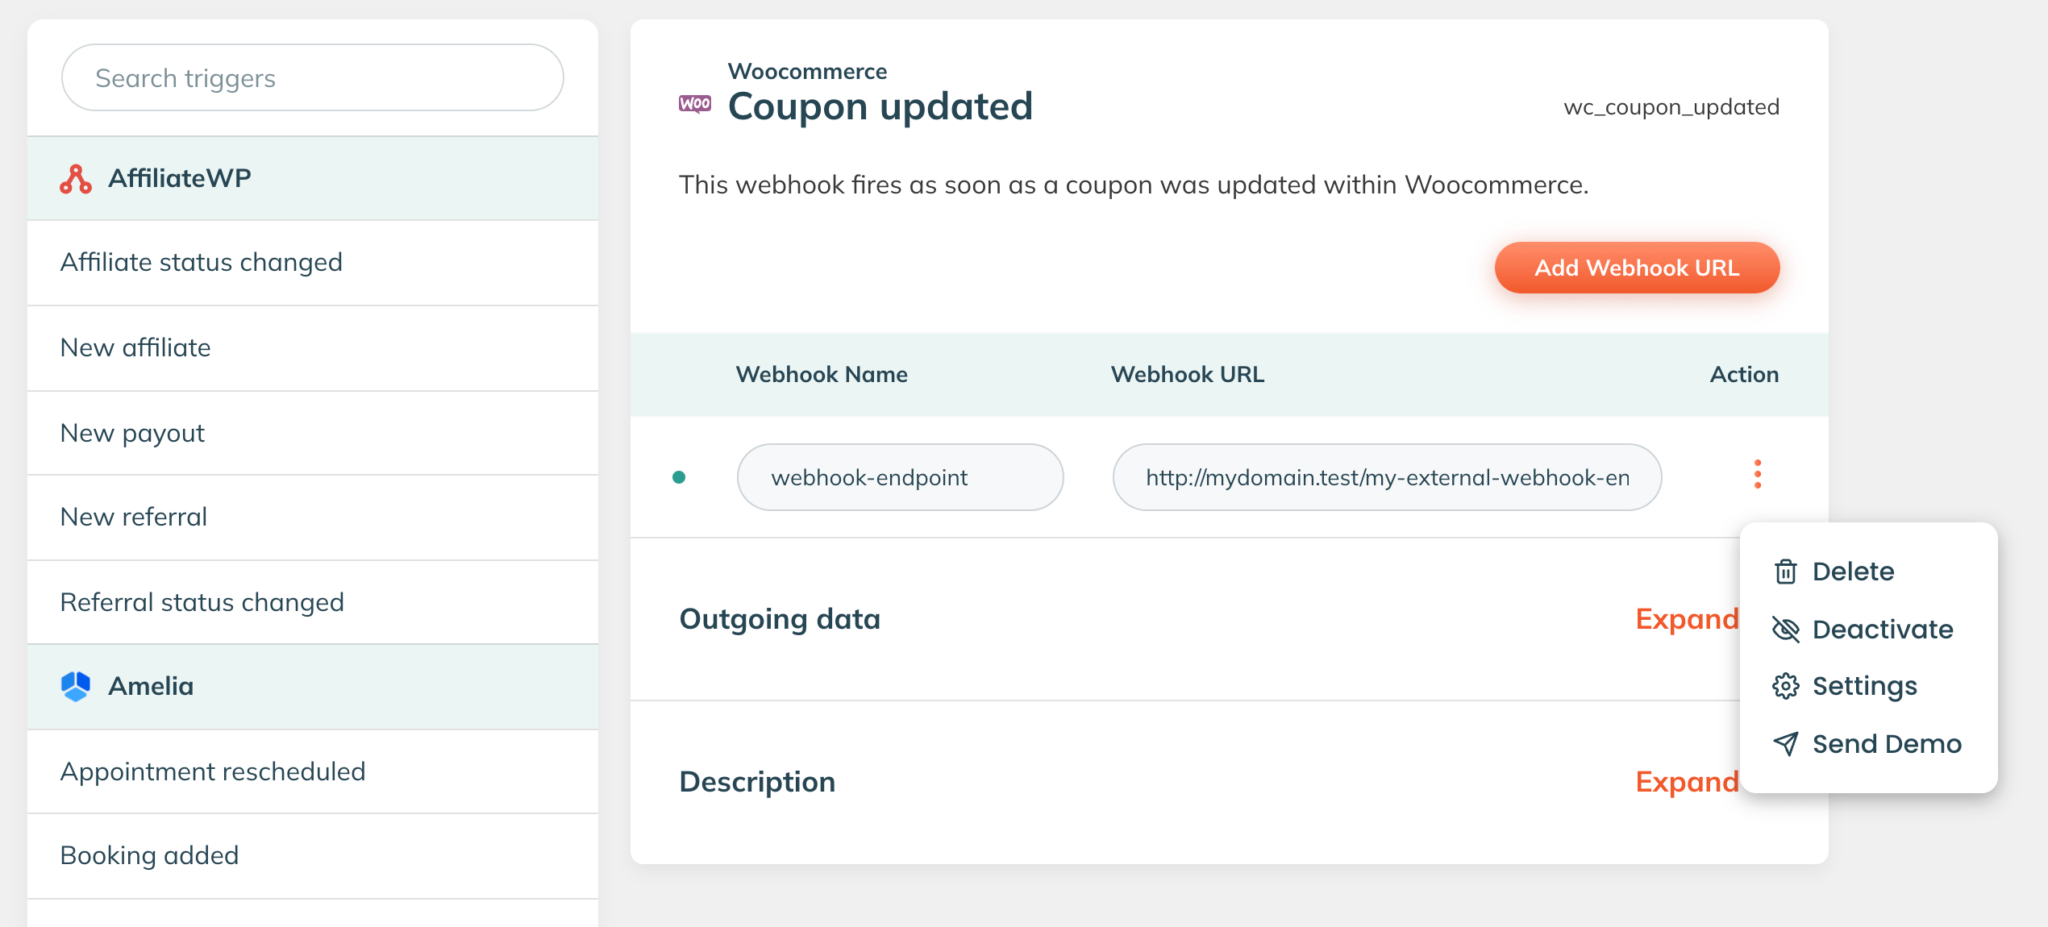 The WP Webhooks screen of the Import processed trigger